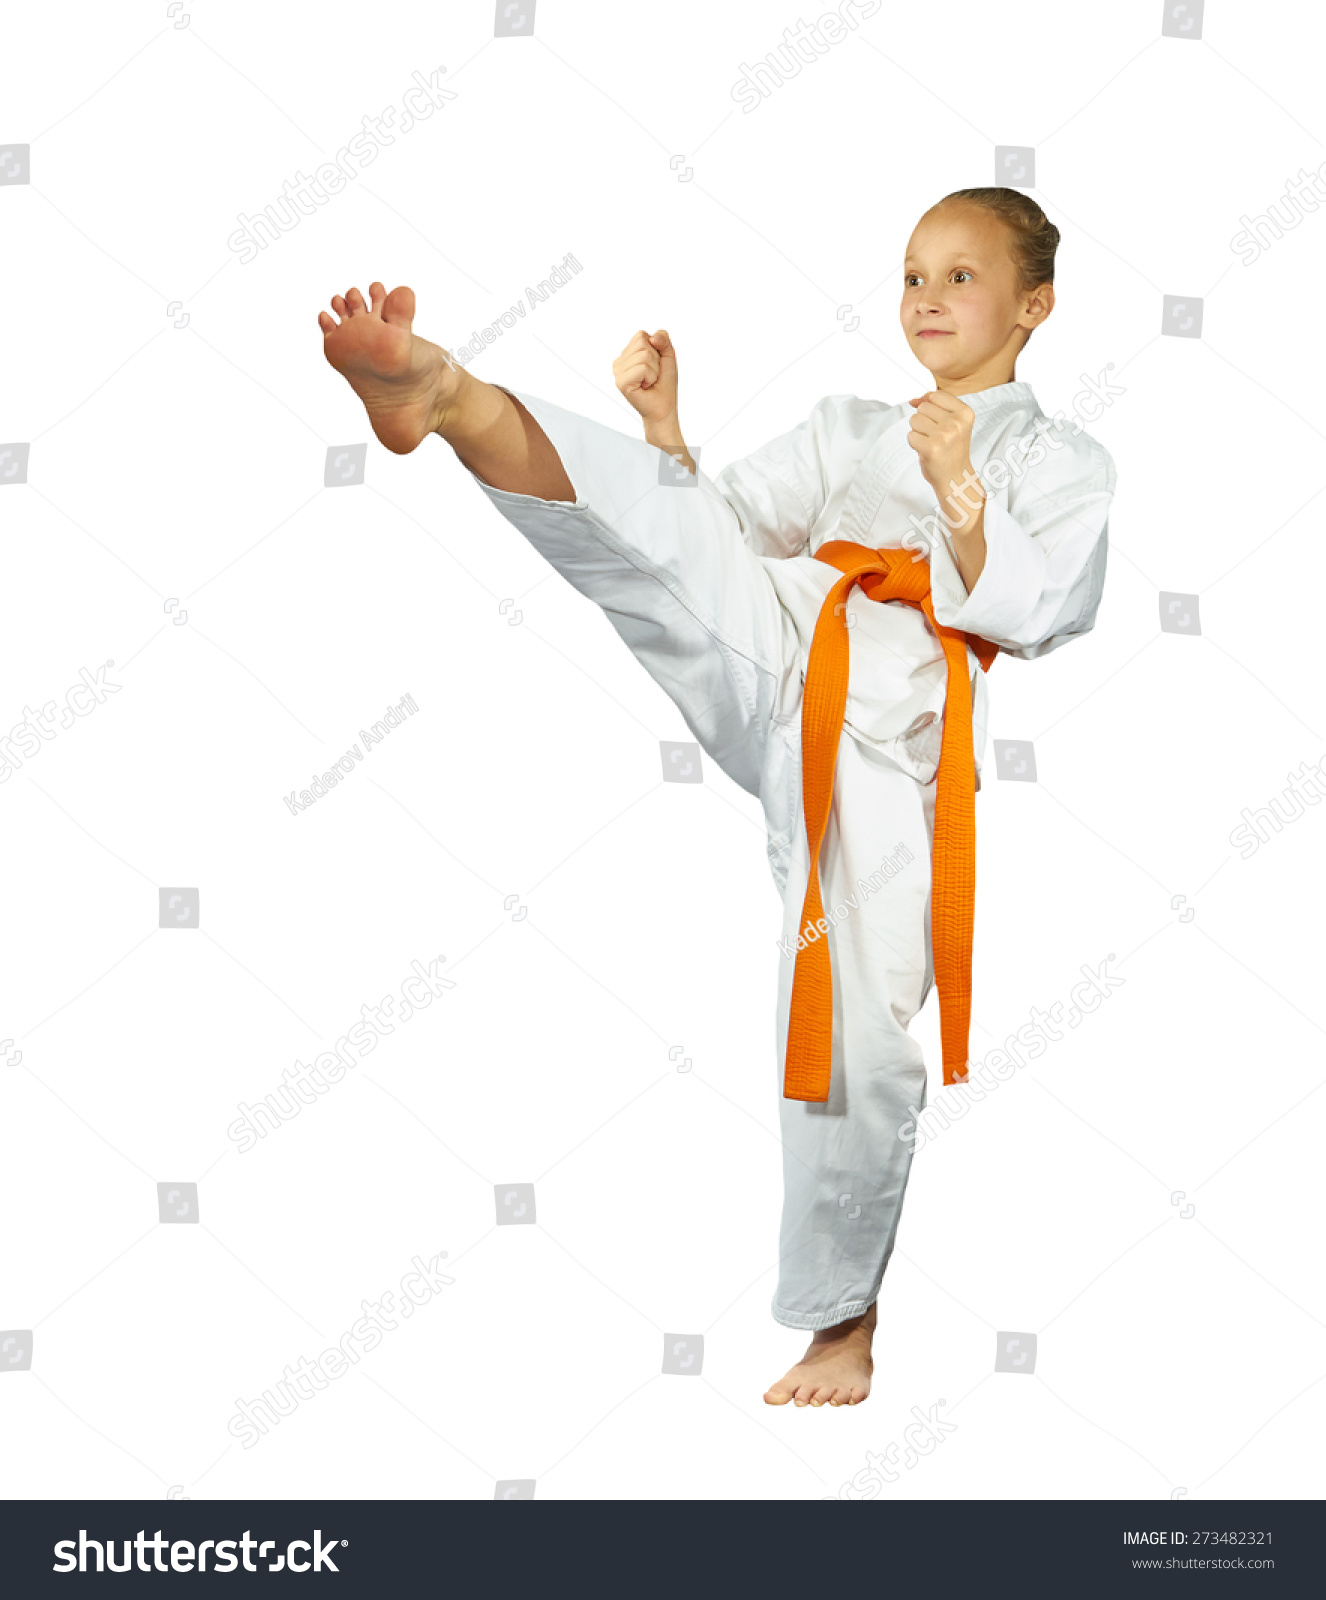 Girl with red belt makes the high kick #273482321